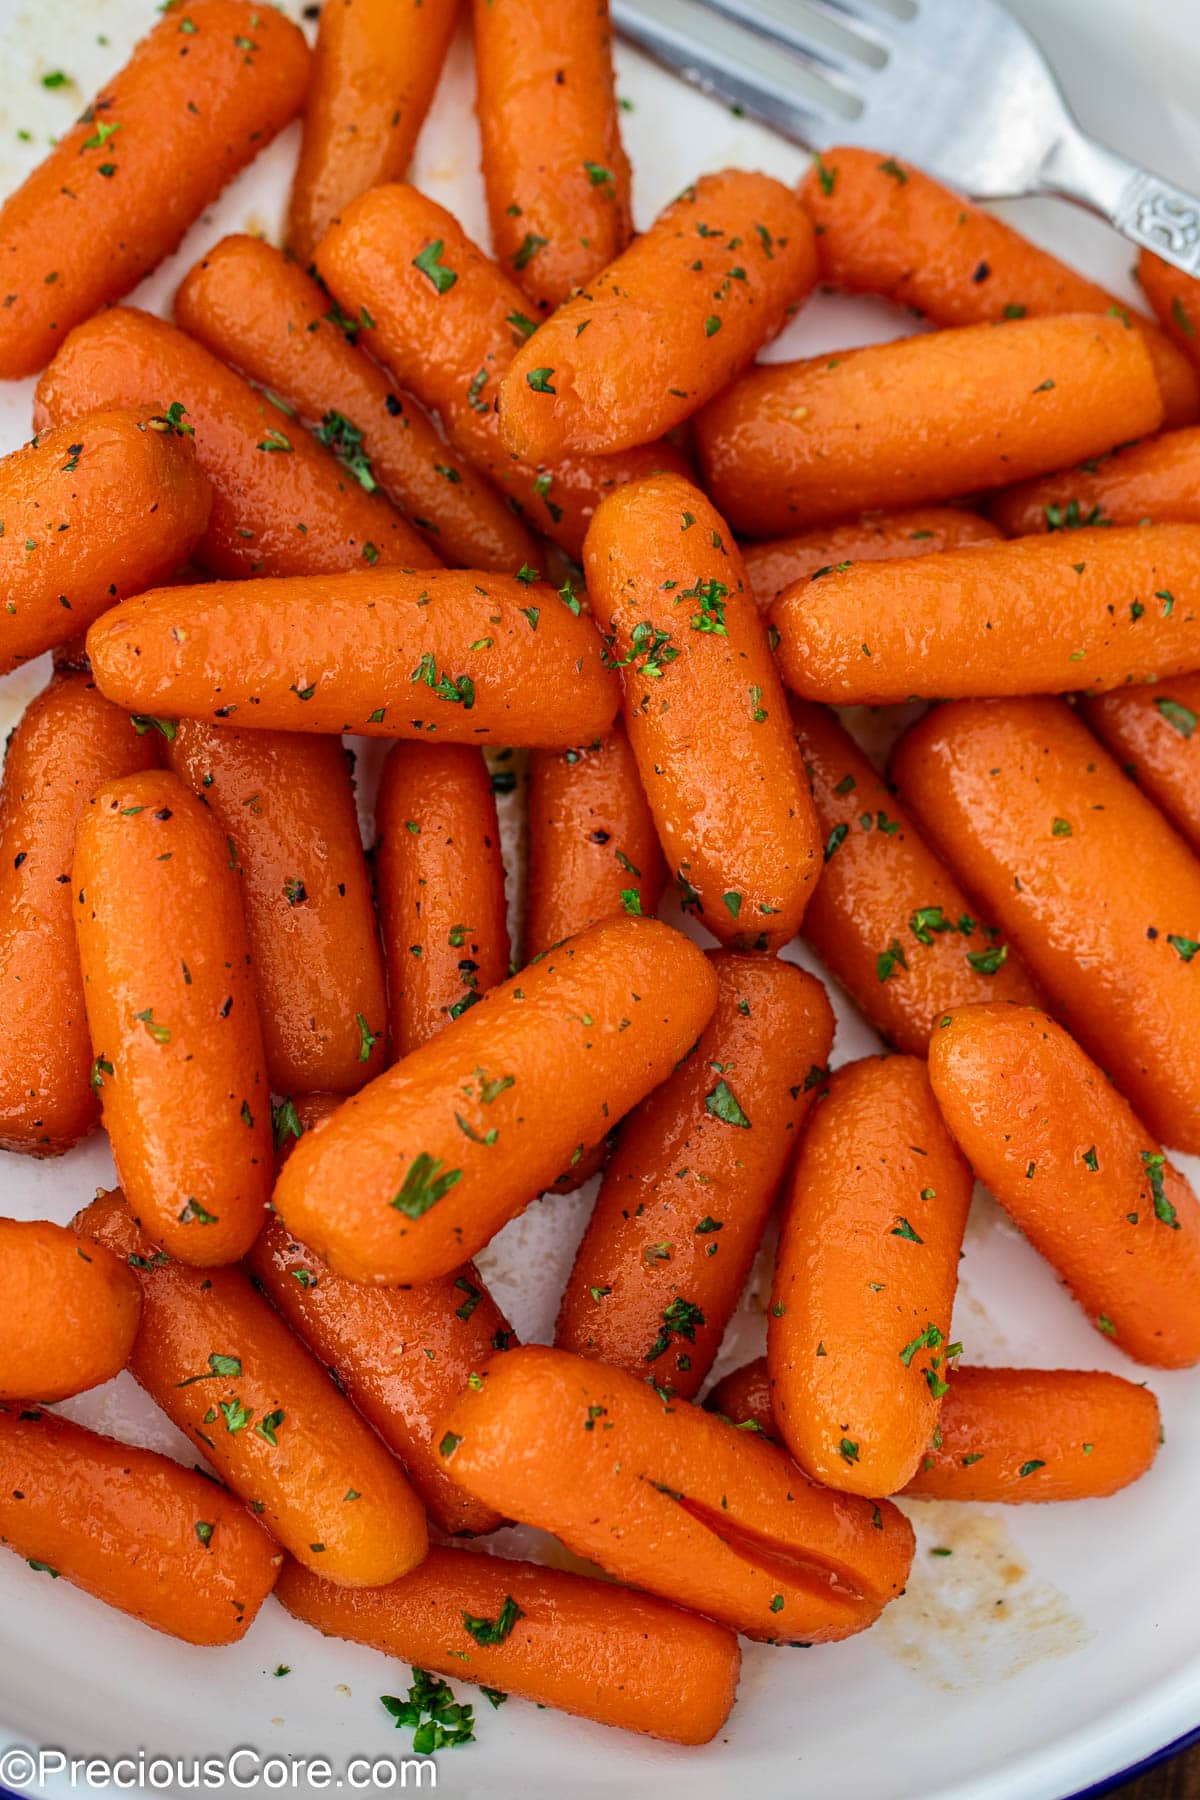 Brown sugar honey glazed carrots on a plate.